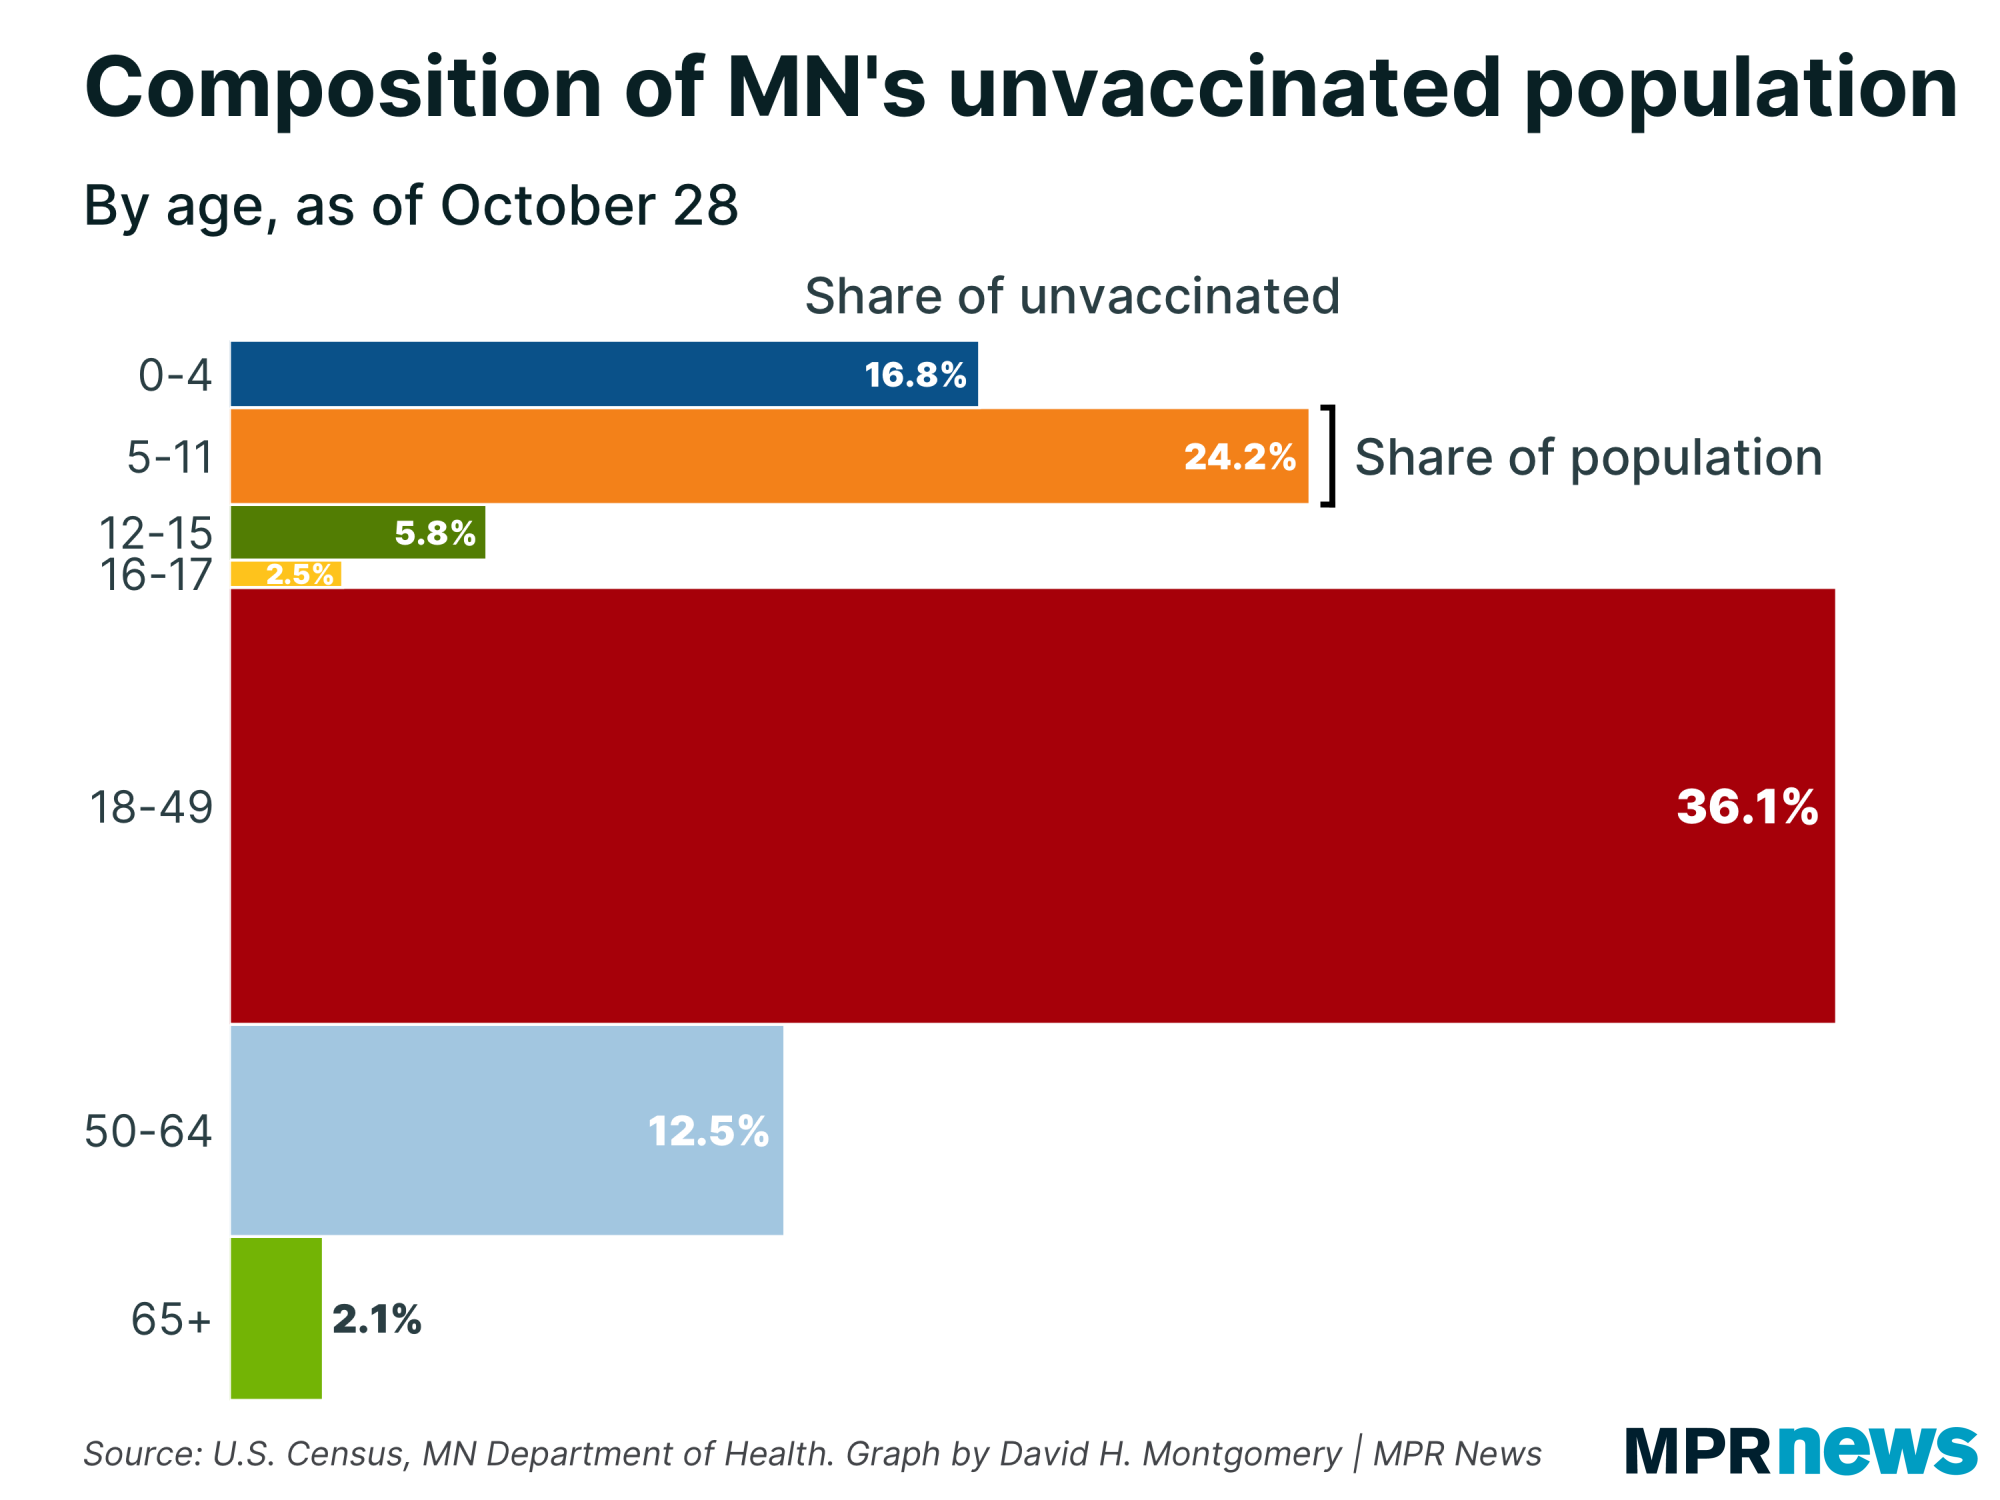 Graph of the composition of Minnesota's unvaccinated population